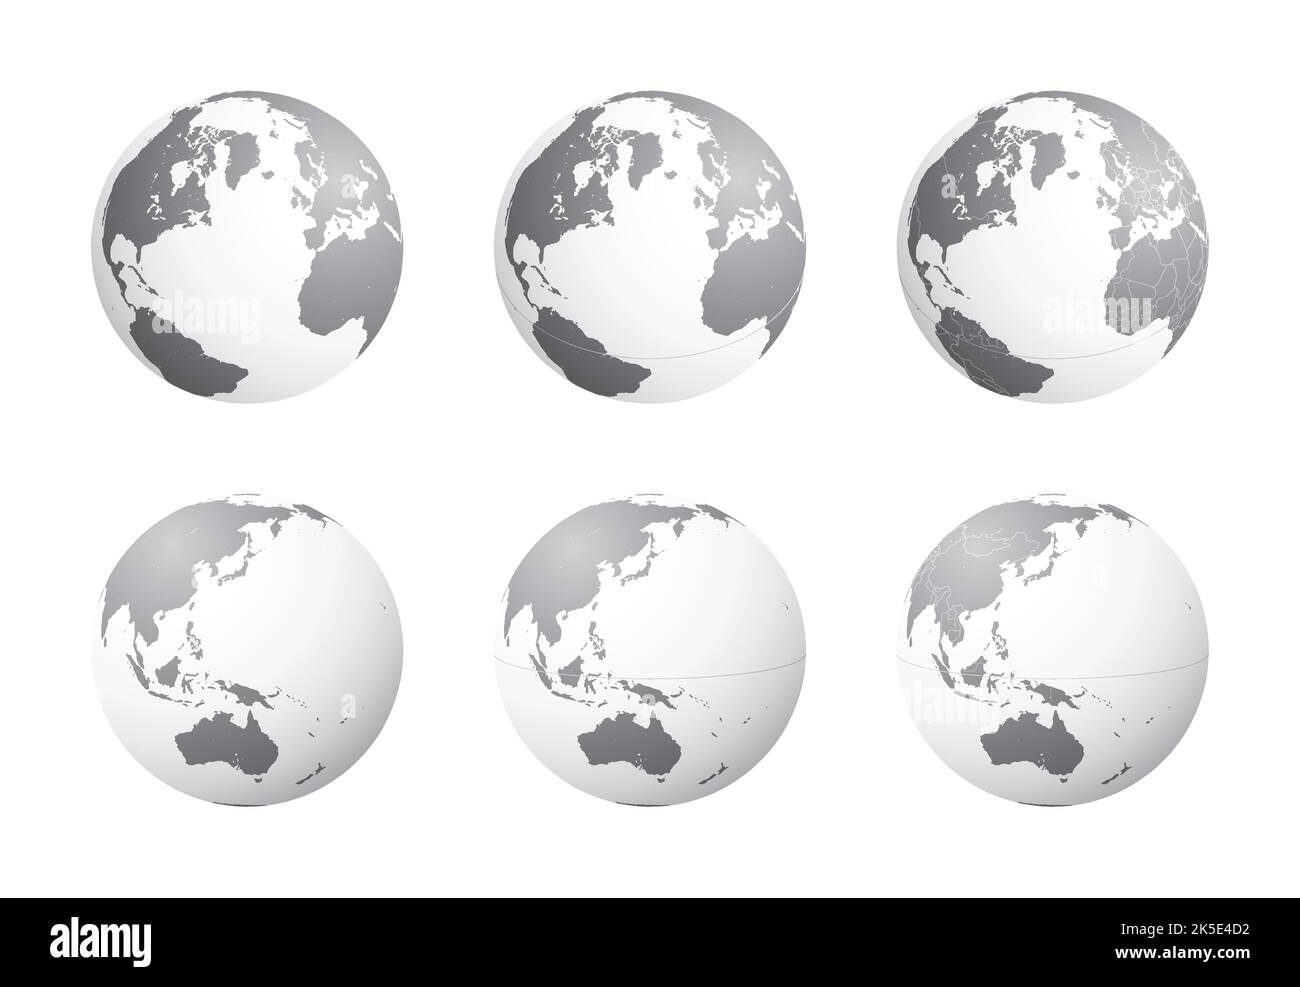 Set of Earth globes focusing on the North Atlantic (top row) and the East Asia and Oceania (bottom row). Carefully layered and grouped for easy editin Stock Vector